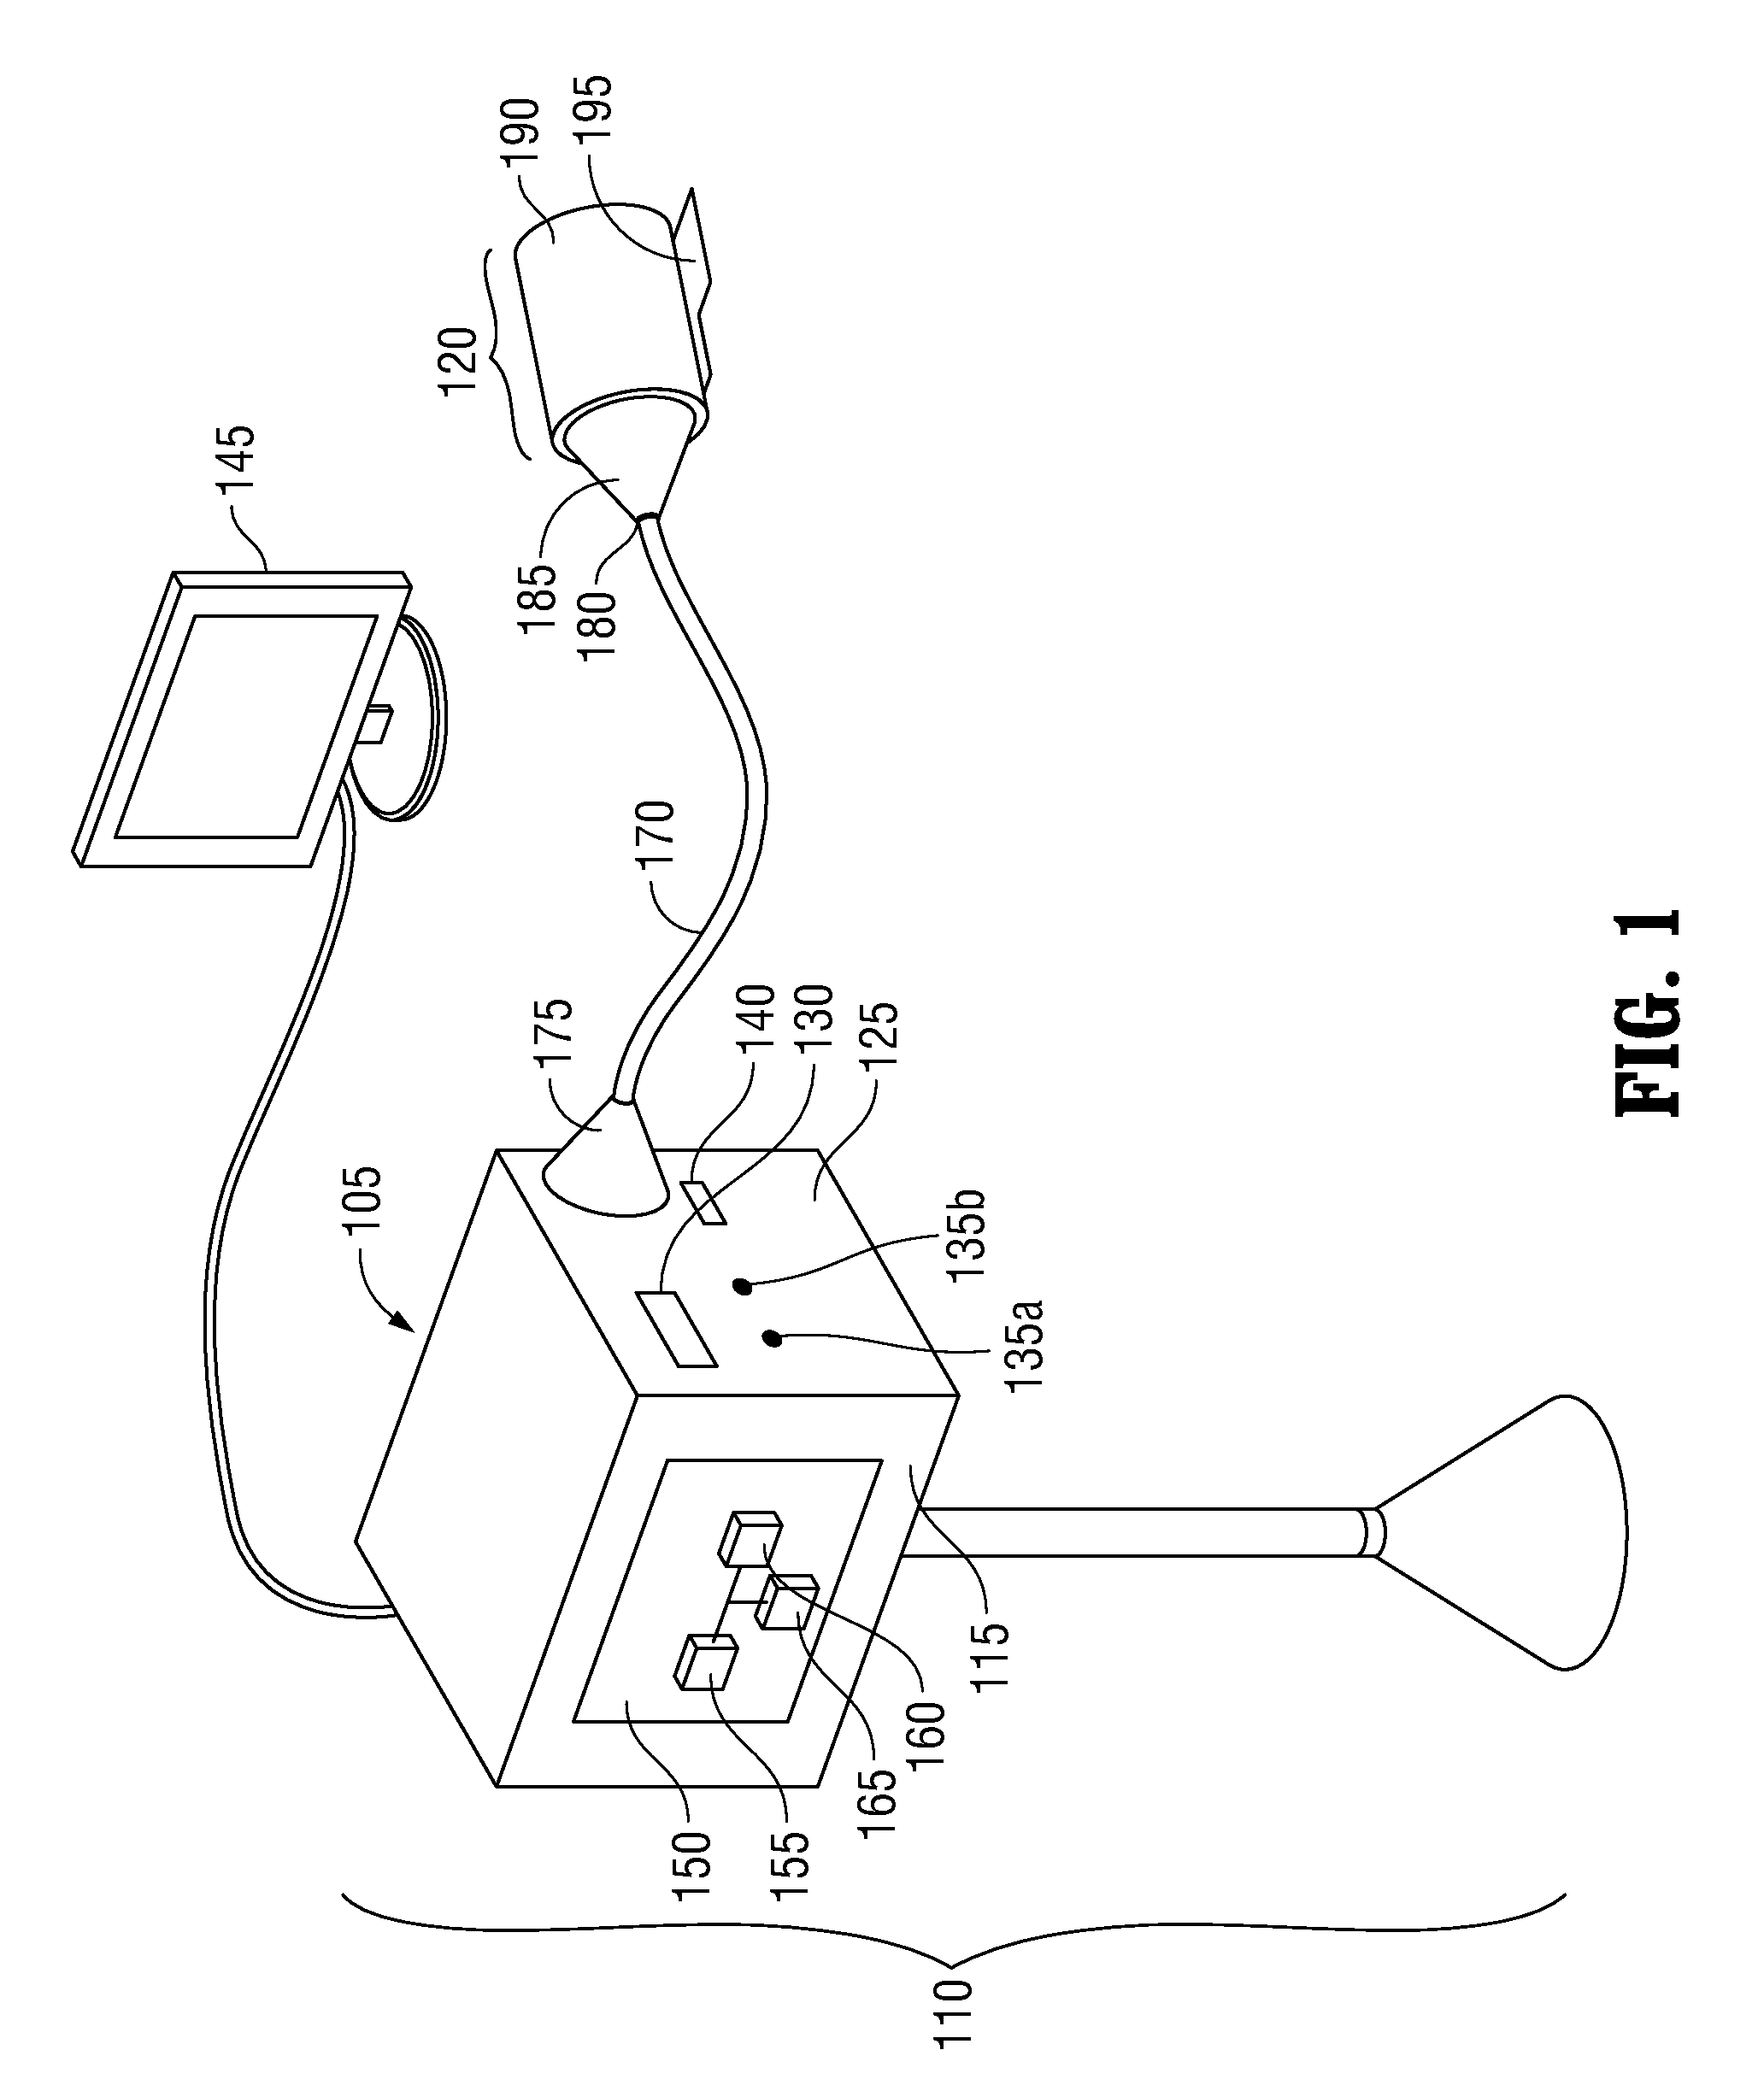 Surgical imaging device